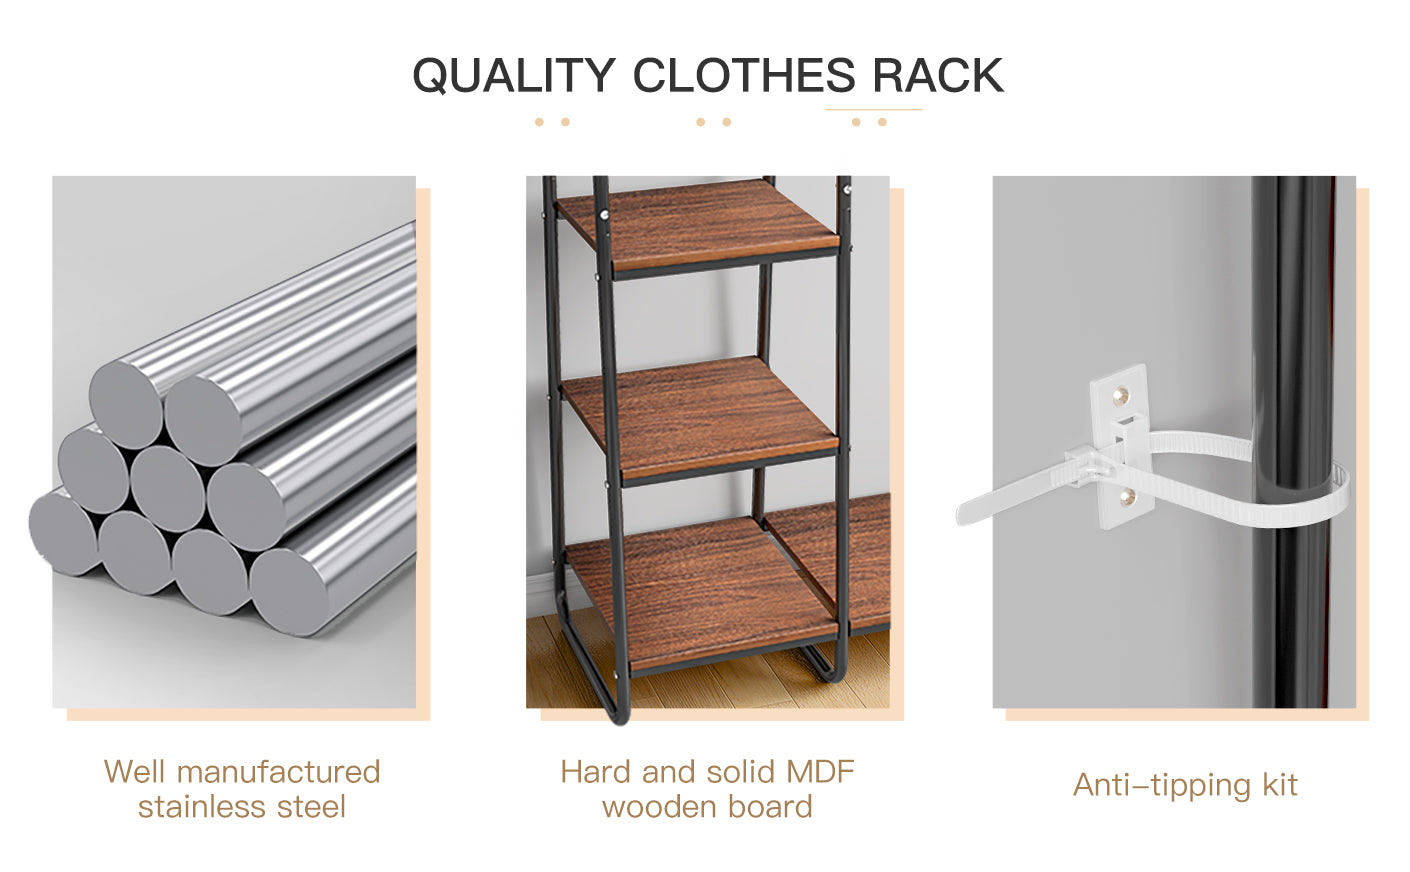 High-quality clothes rack with Anti-tipping kit is more stable